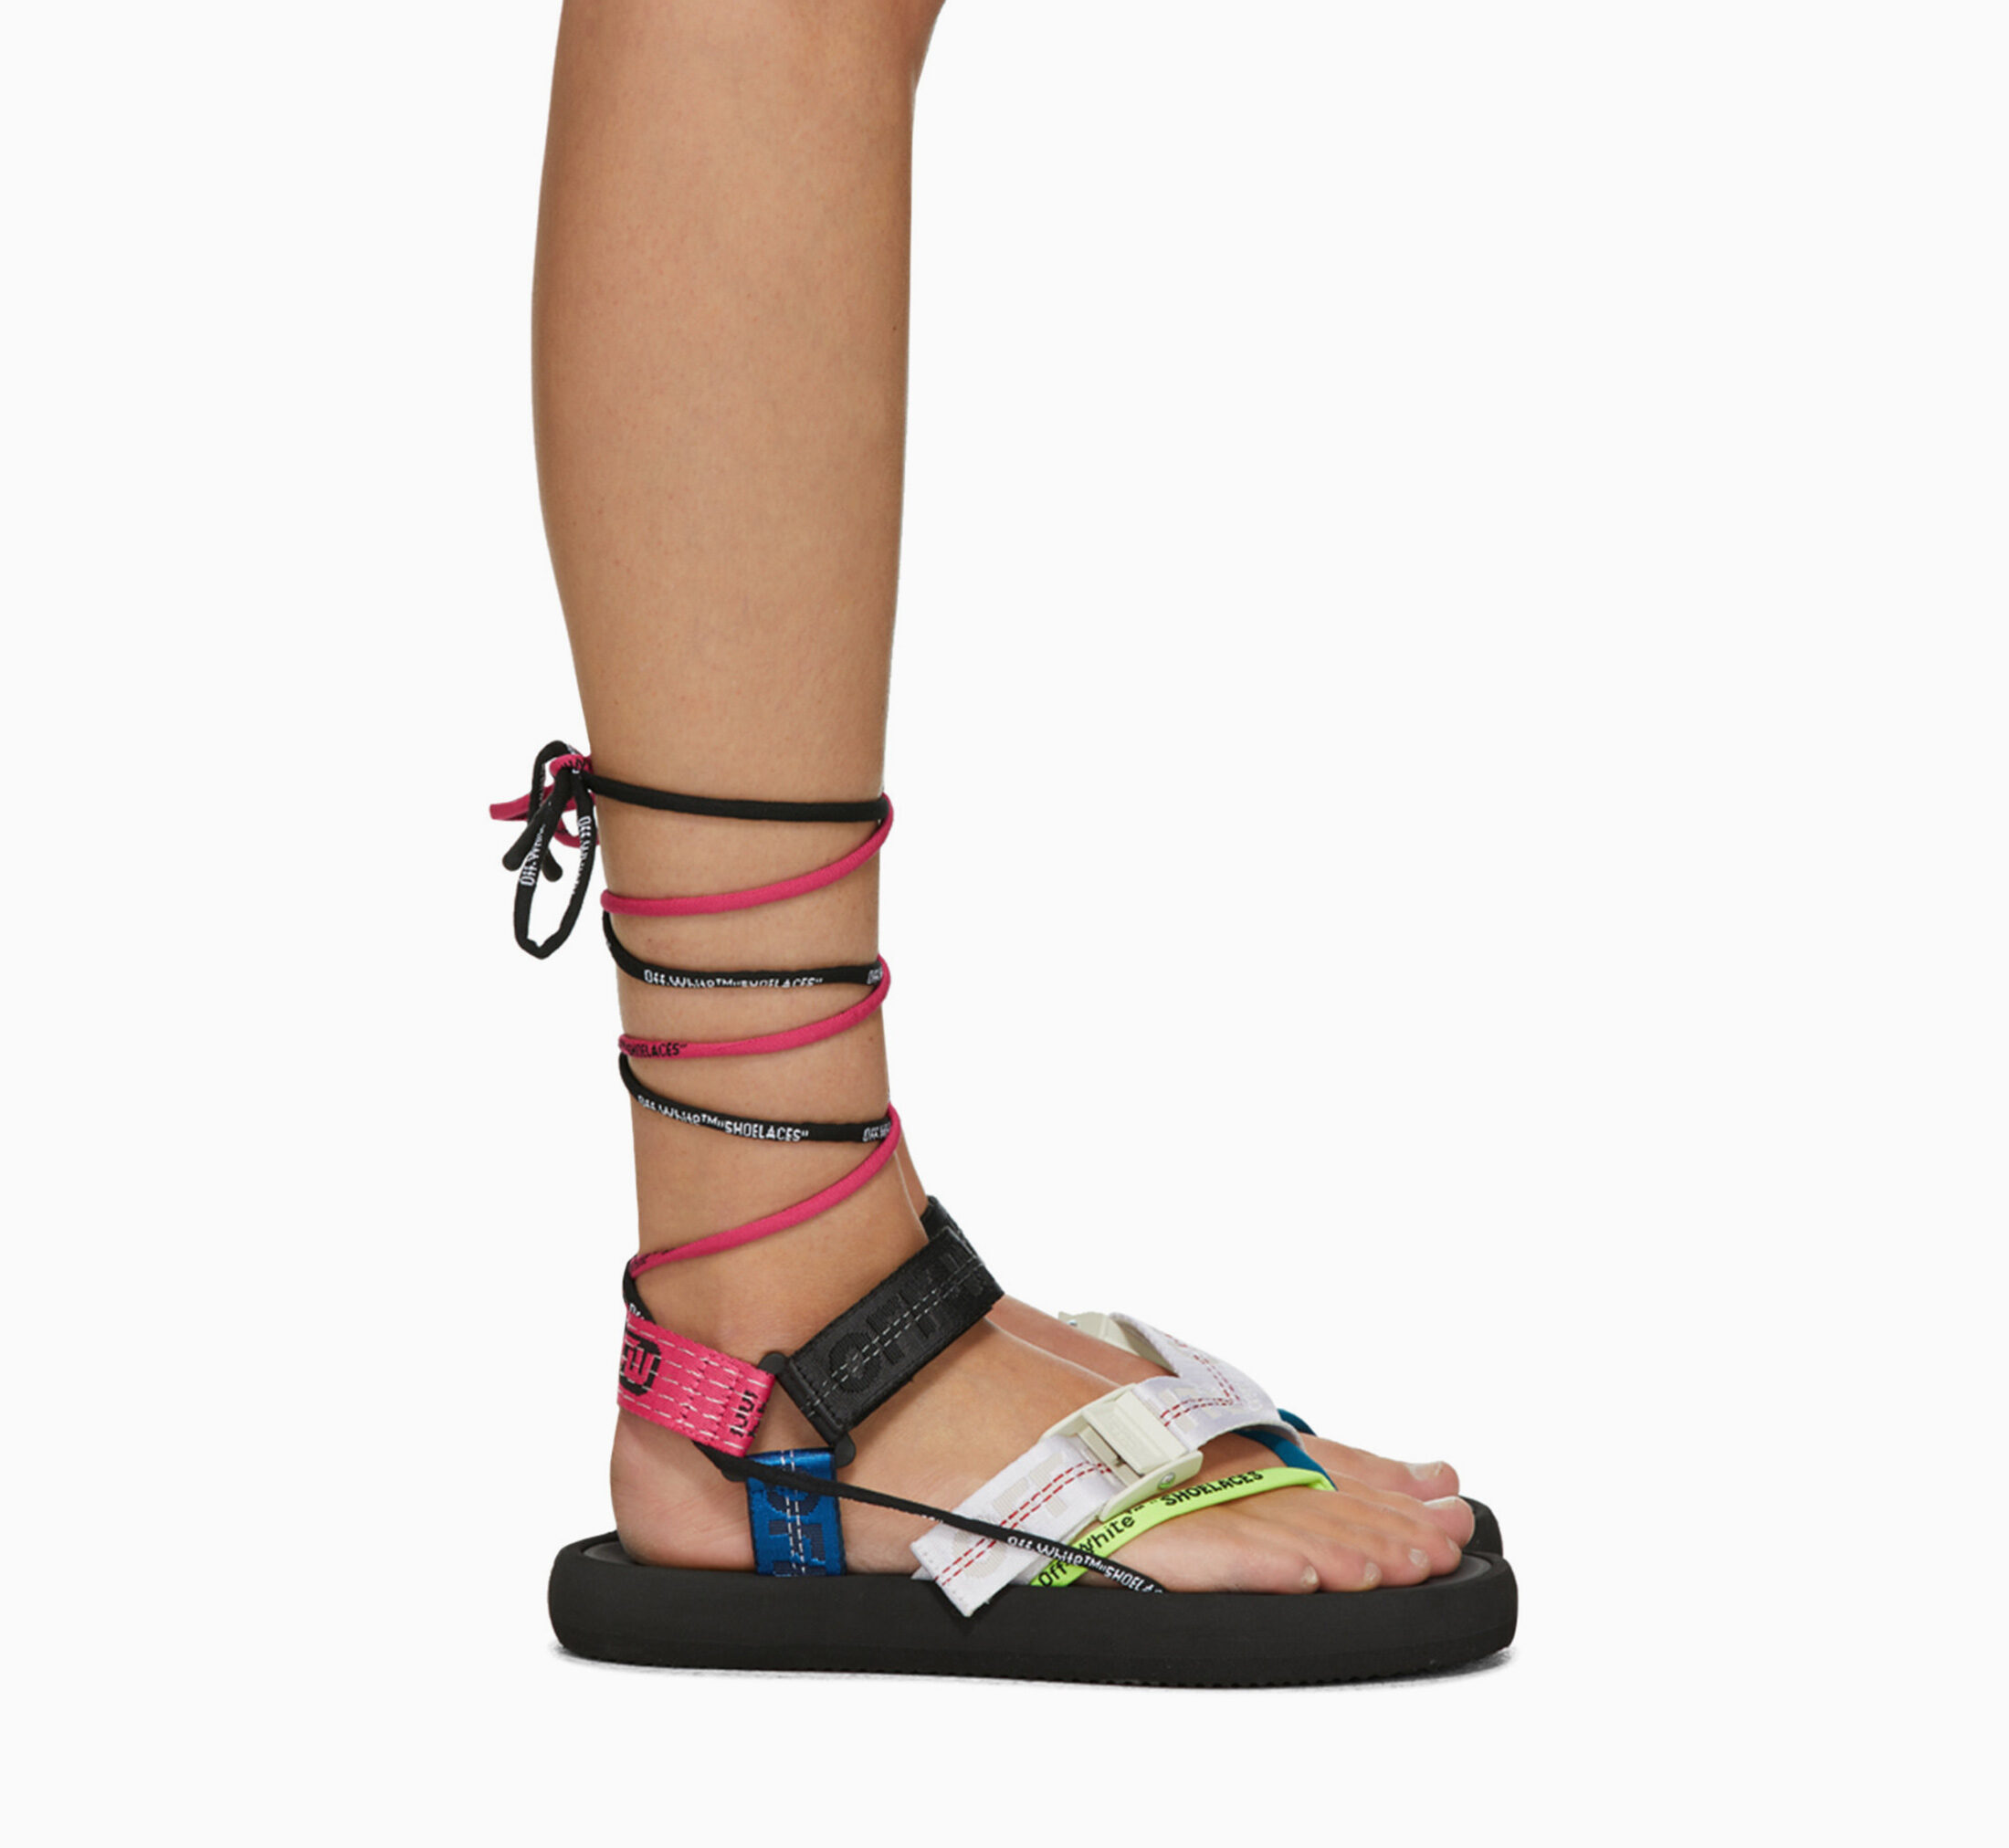 10 Ugly Sandals Inspired by Chanel